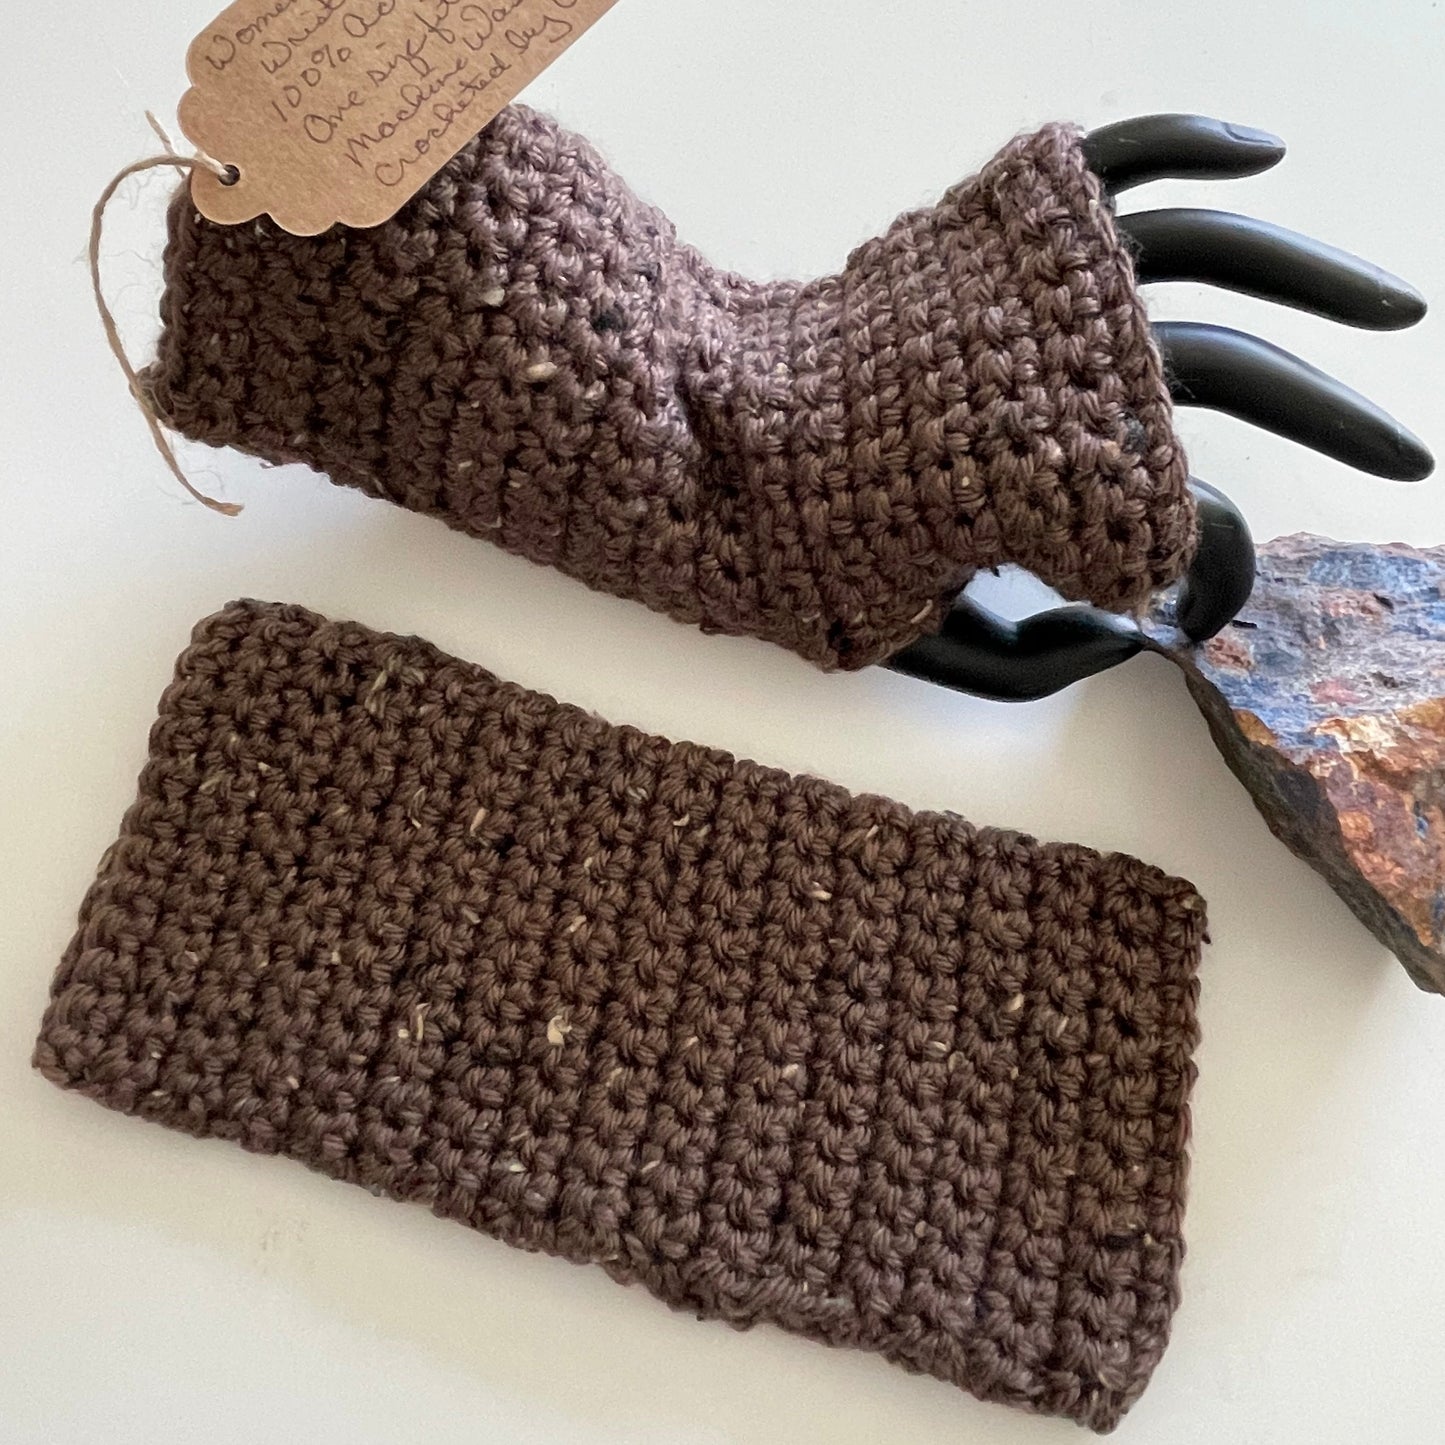 Extra Soft Dark Chocolate Speckled Gaming Texting Writing Tech Fingerless Gloves Wrist Warmers